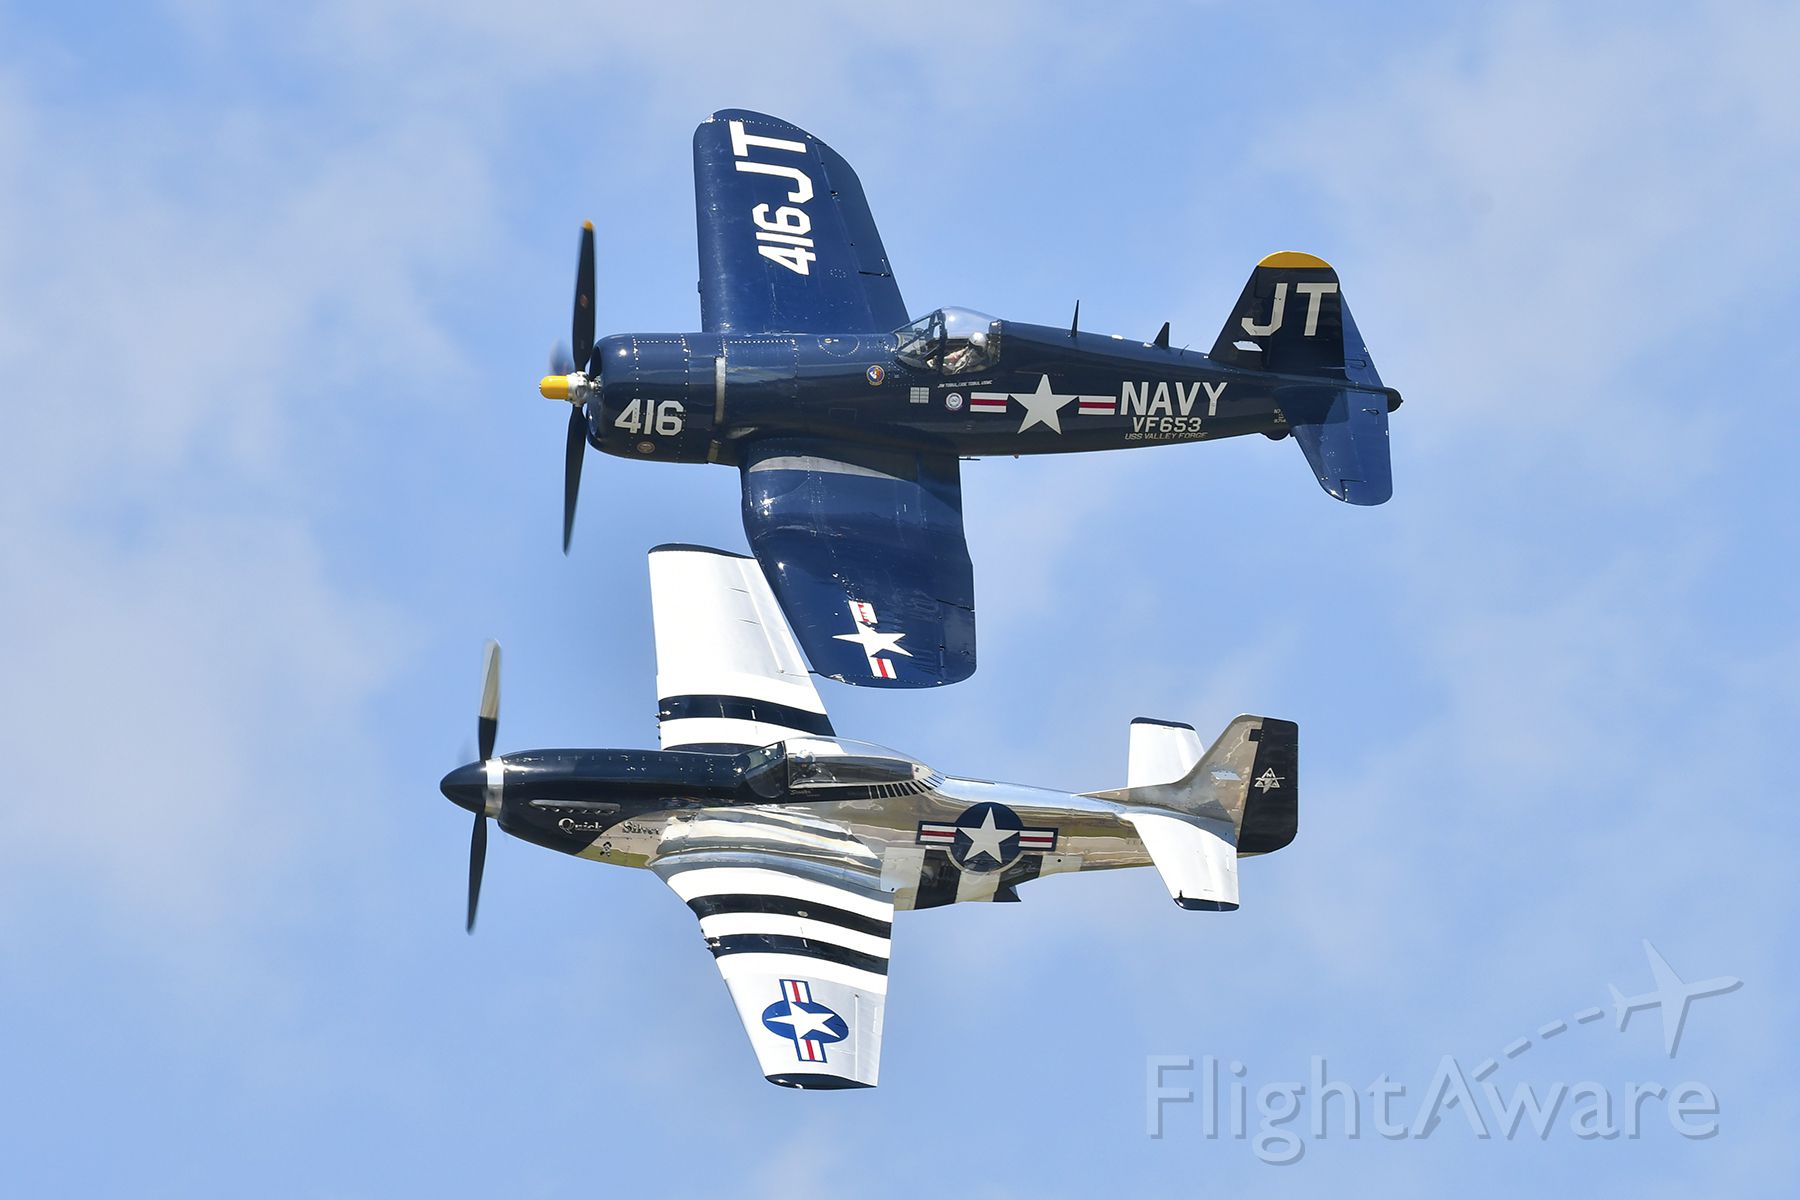 — — - P-51D Mustang and F-4U Corsair in a close formation flight during Battle Creek Air Show 2018.